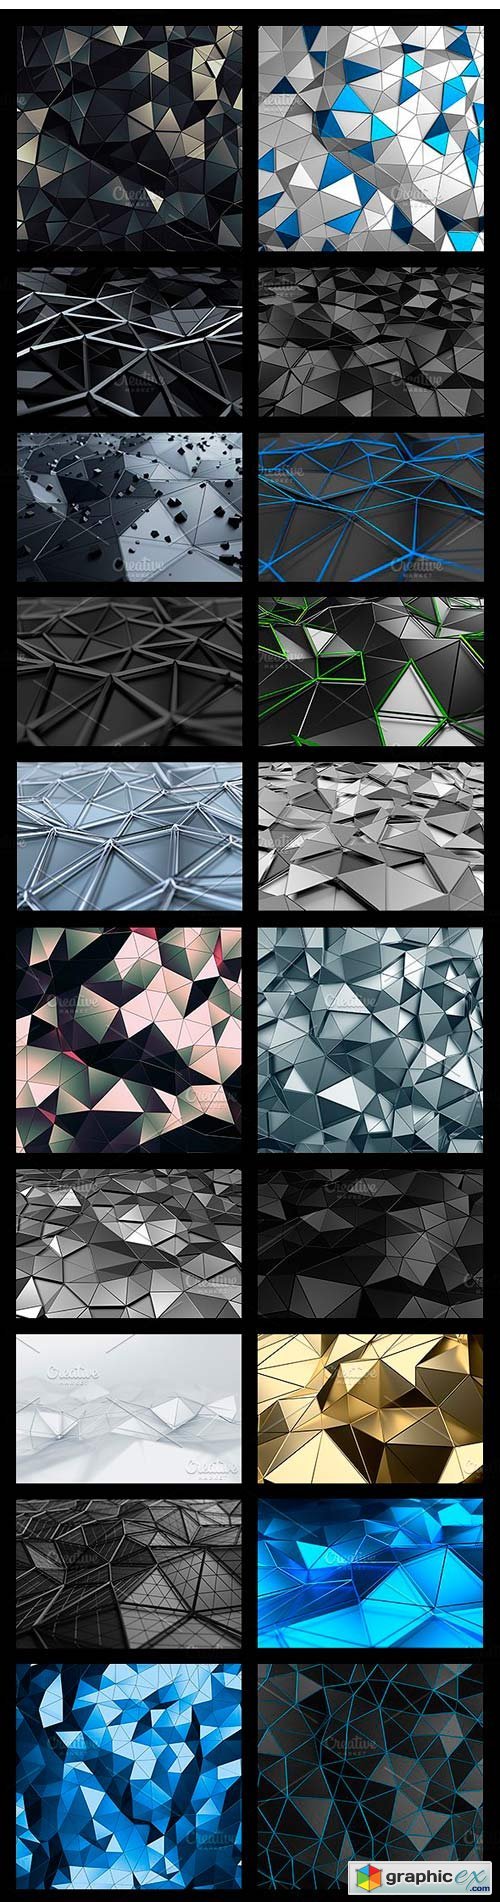 3D Renders of Low Poly Backgrounds